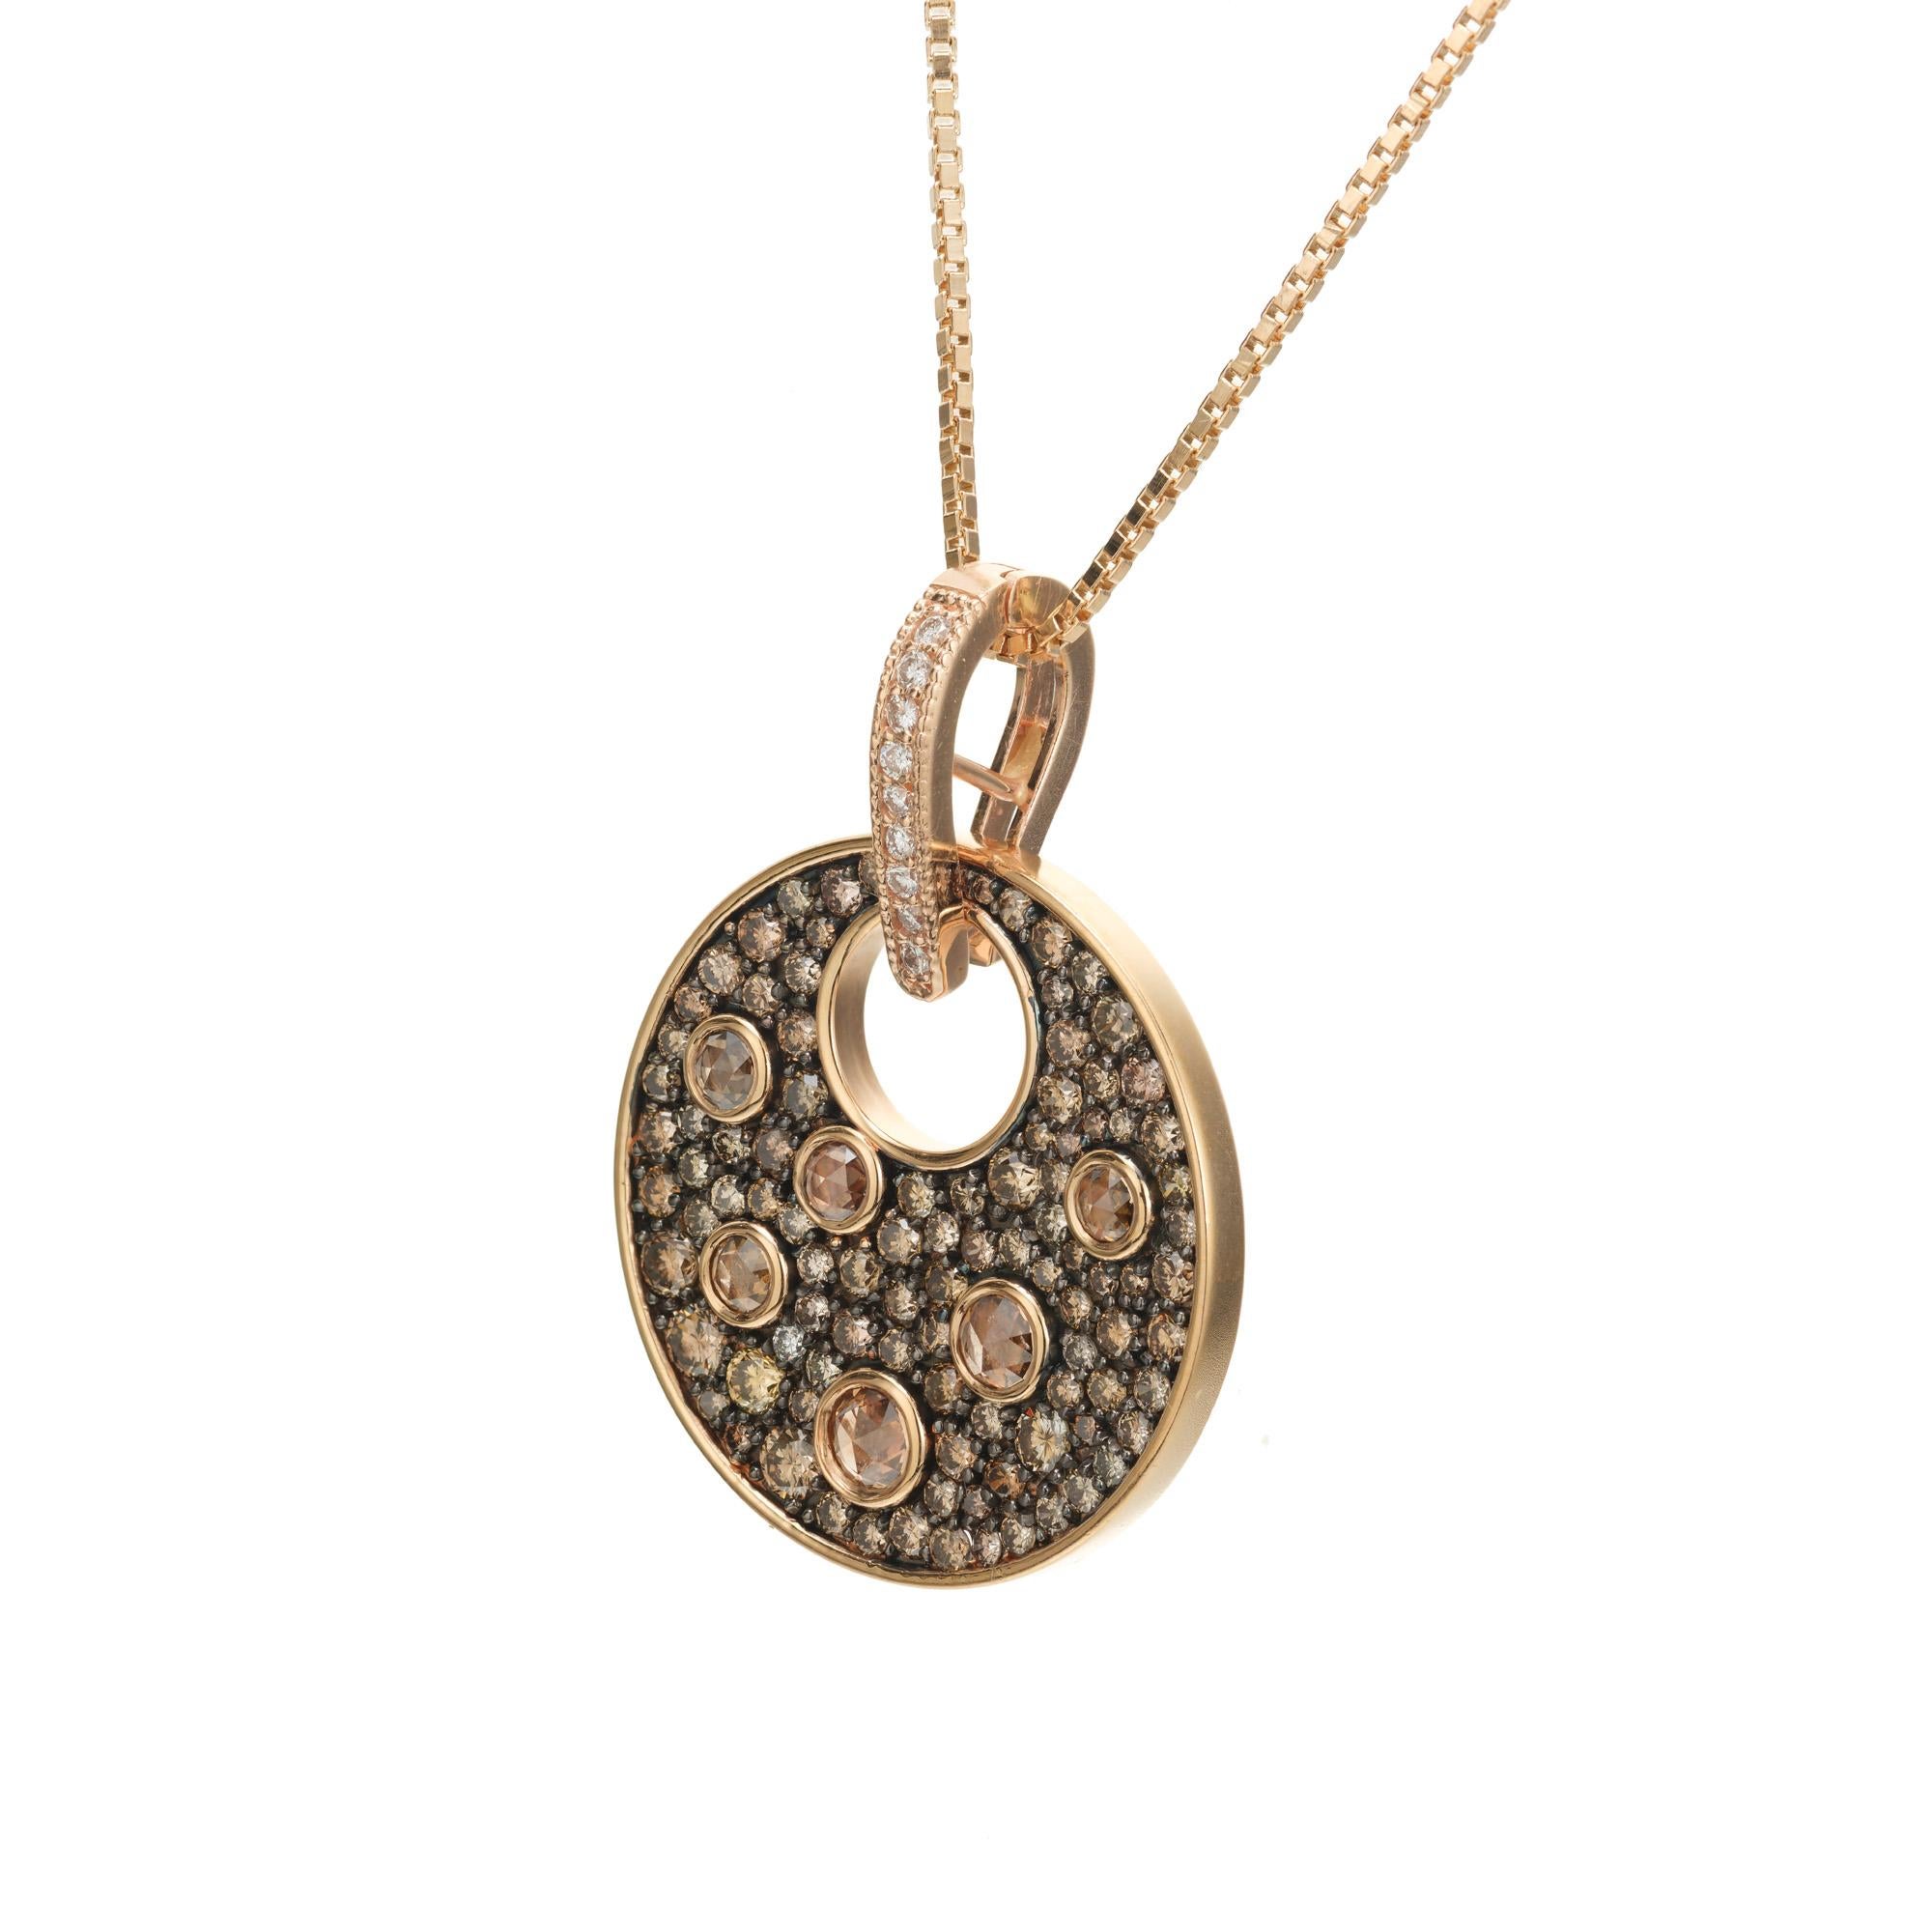 Diamond round pendant necklace. 117 orange/brown chocolate and white diamonds totaling 2.48cts in a round 18k rose and yellow gold pendant. 18 inch 18k yellow gold chain.

6 rose cut orange brown diamonds, SI approx. .68cts
102 round brilliant cut